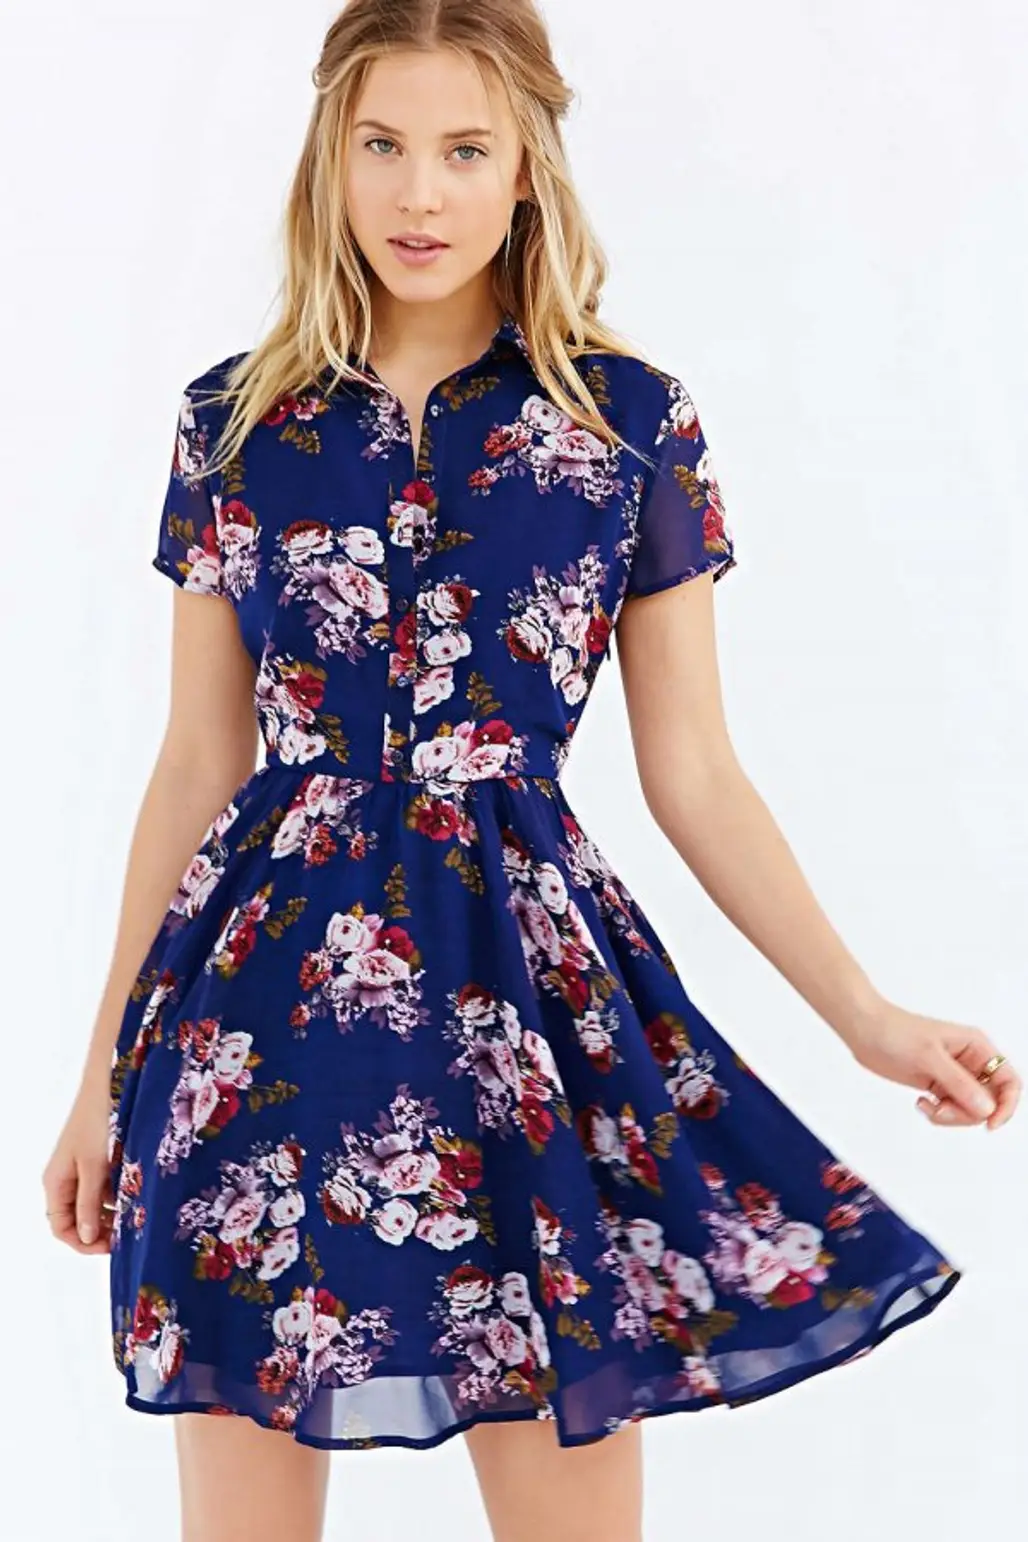 Urban Outfitters Lucca Couture Floral Shirt Dress